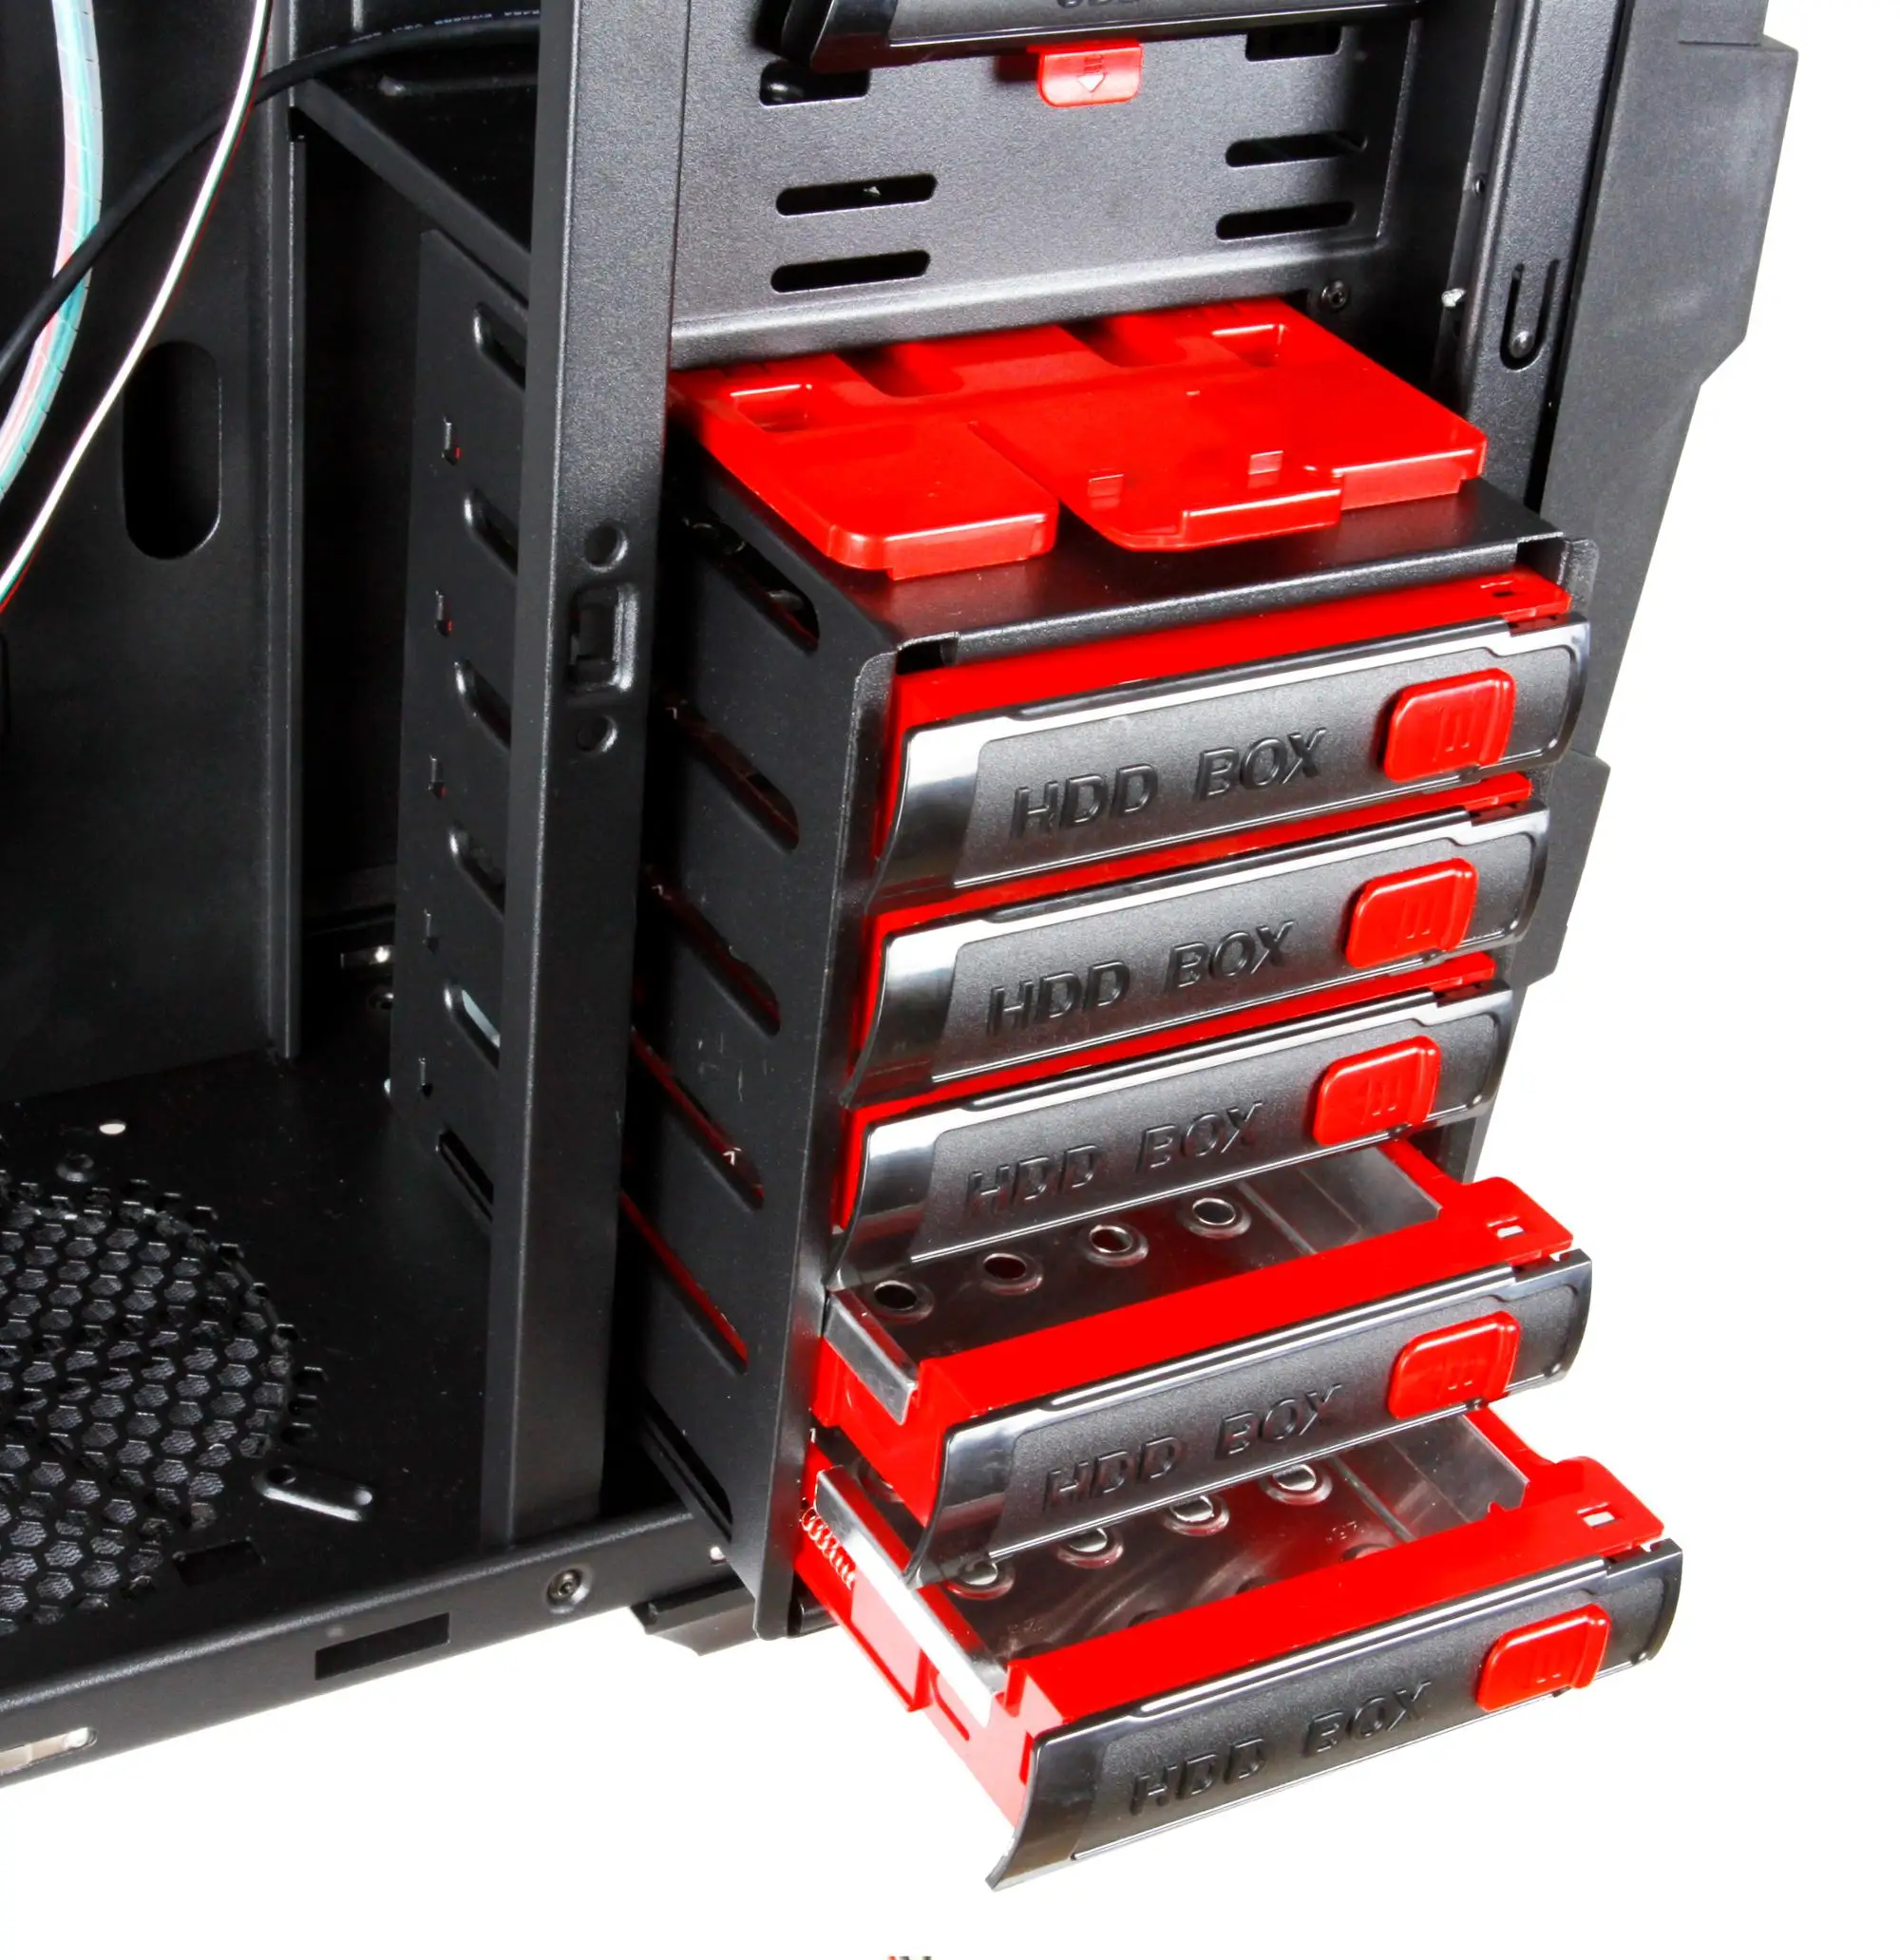 Professional Computer Gaming Case Manufactory - Buy Computer Case Gaming,Computer Gaming Case ...